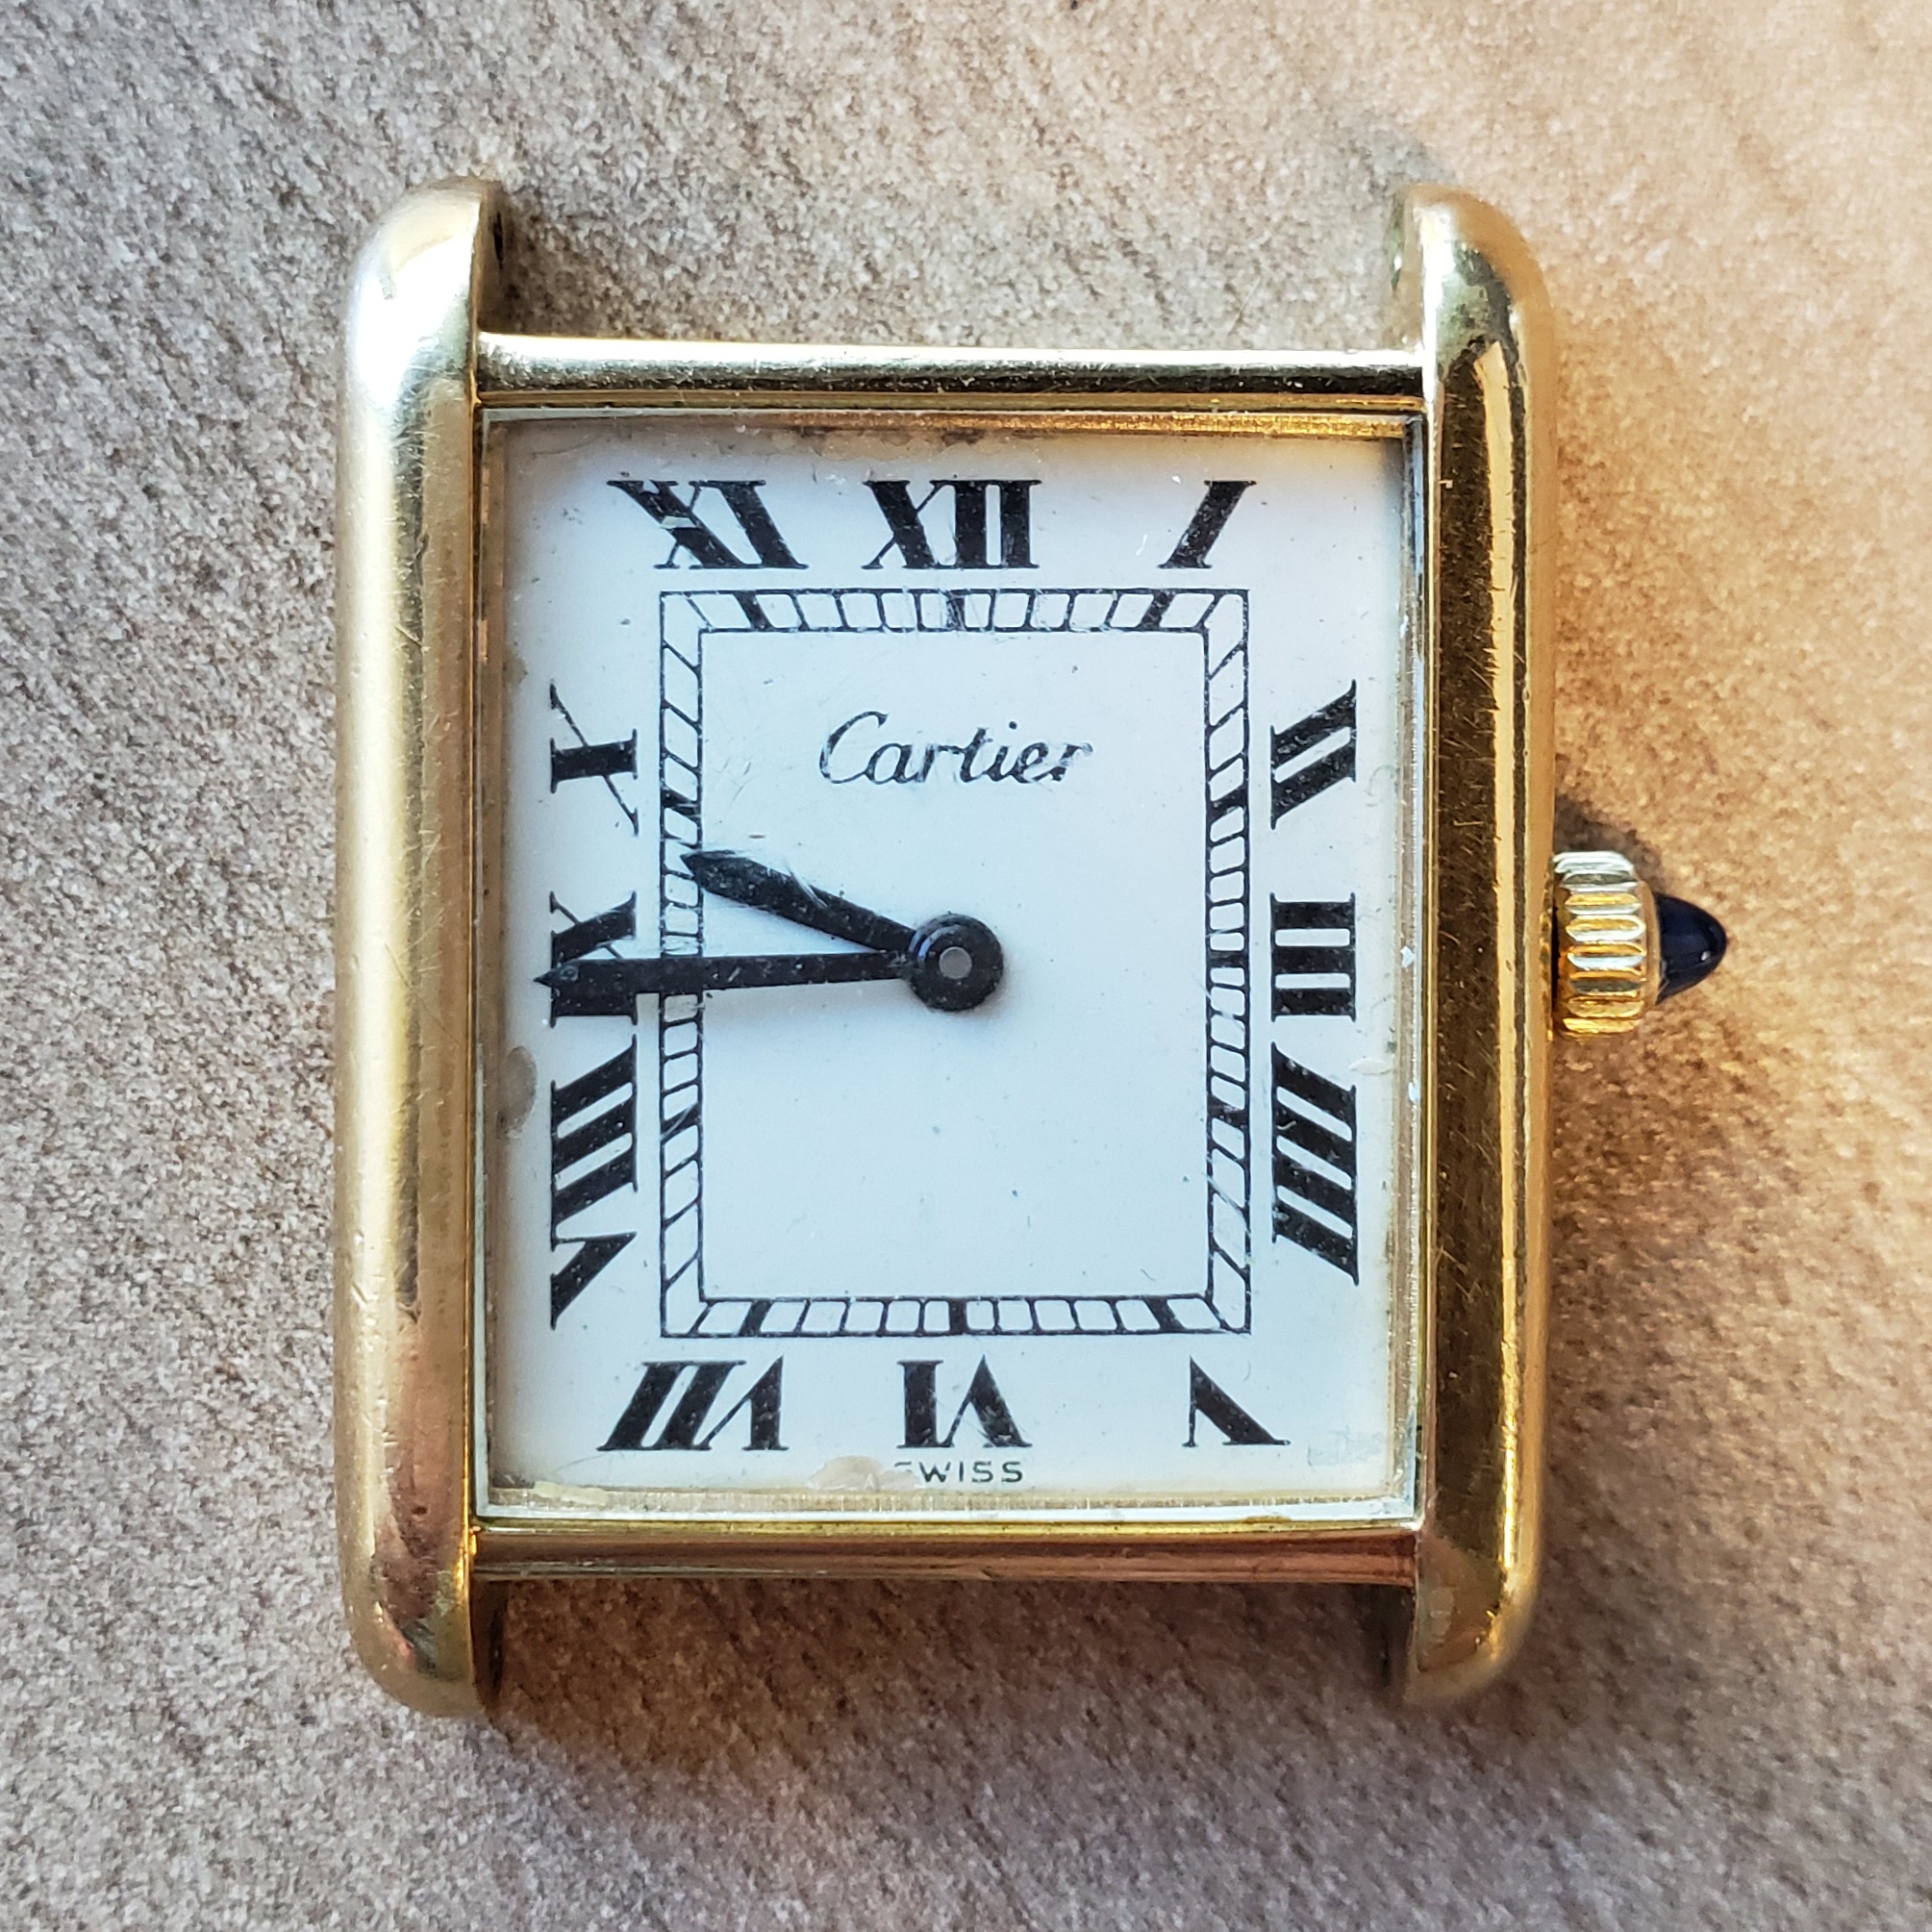 cartier model number search